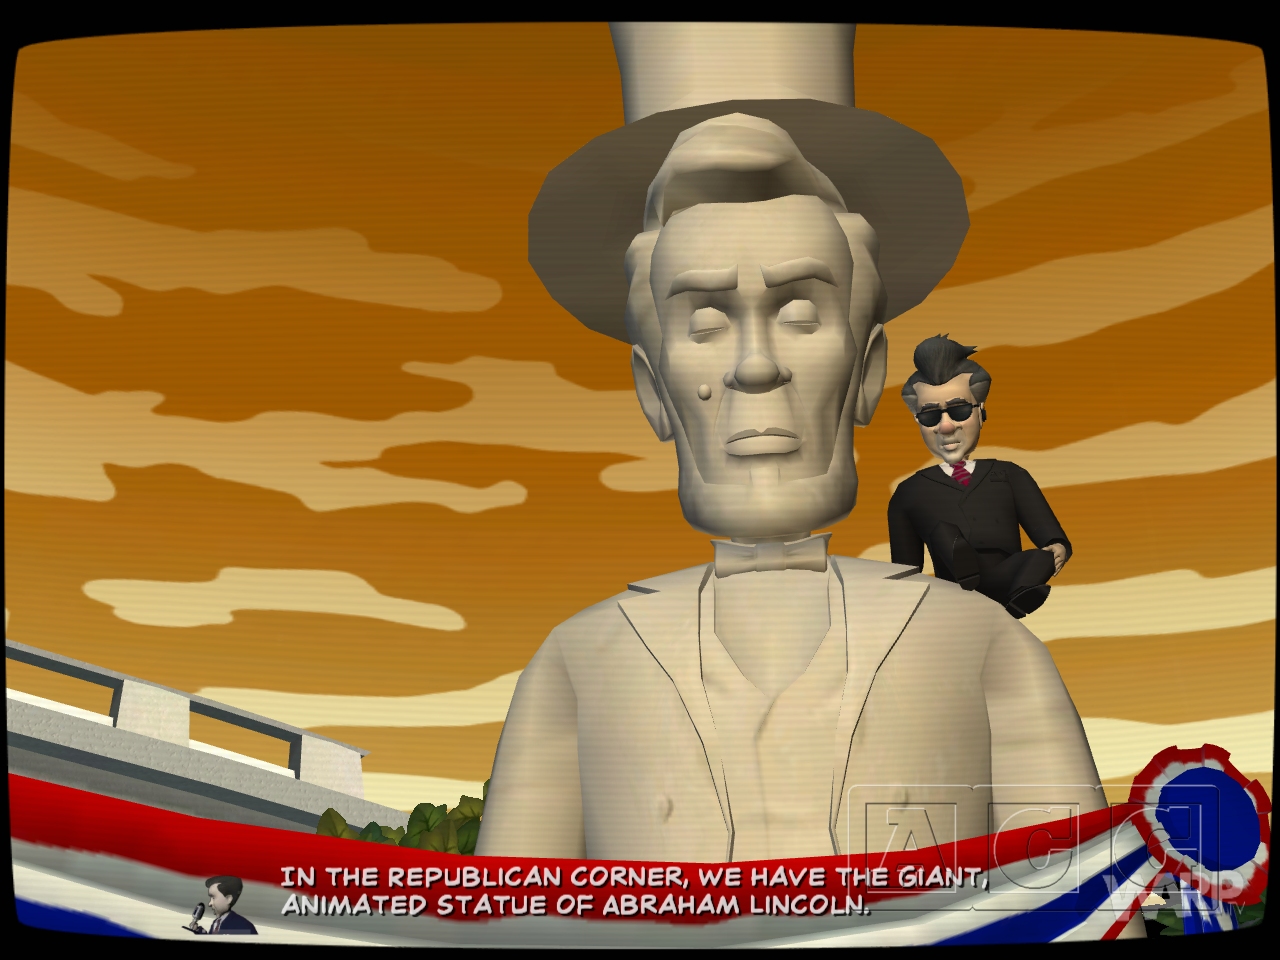 Sam & Max Save the World Episode 104: Abe Lincoln Must Die!